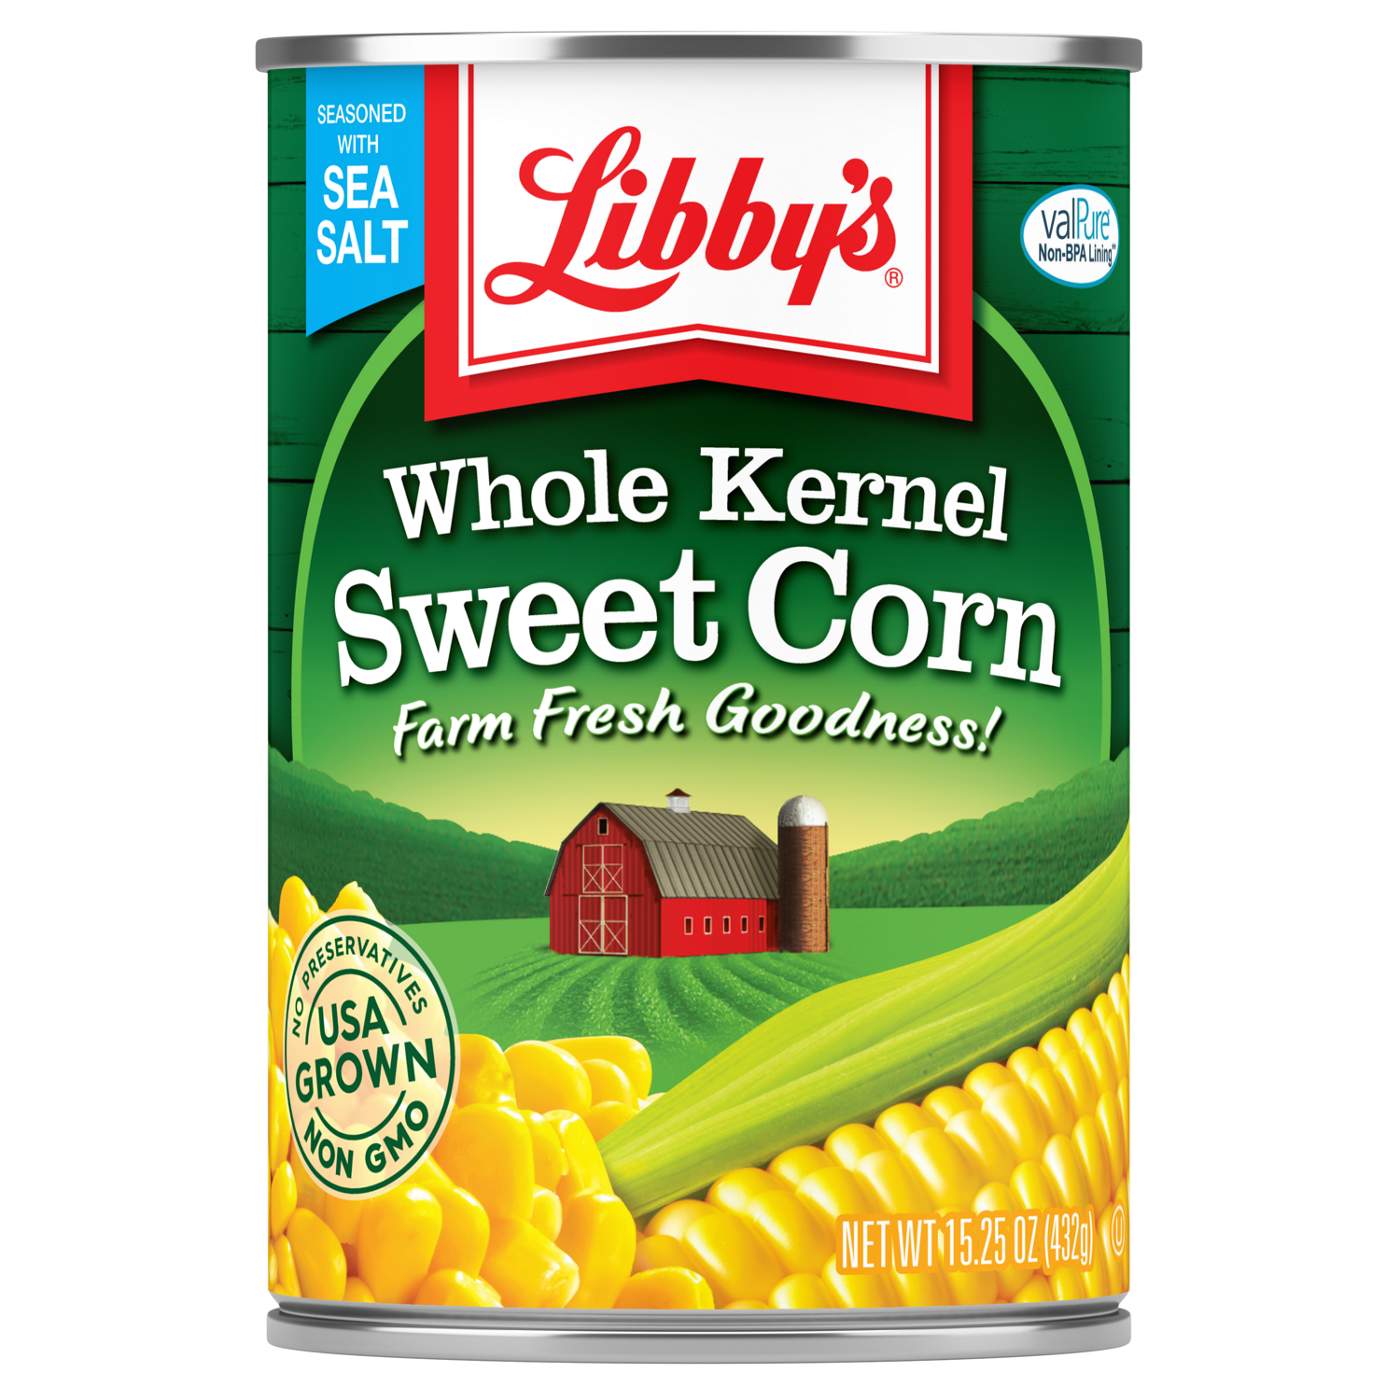 Libby's Whole Kernel Sweet Corn; image 1 of 5